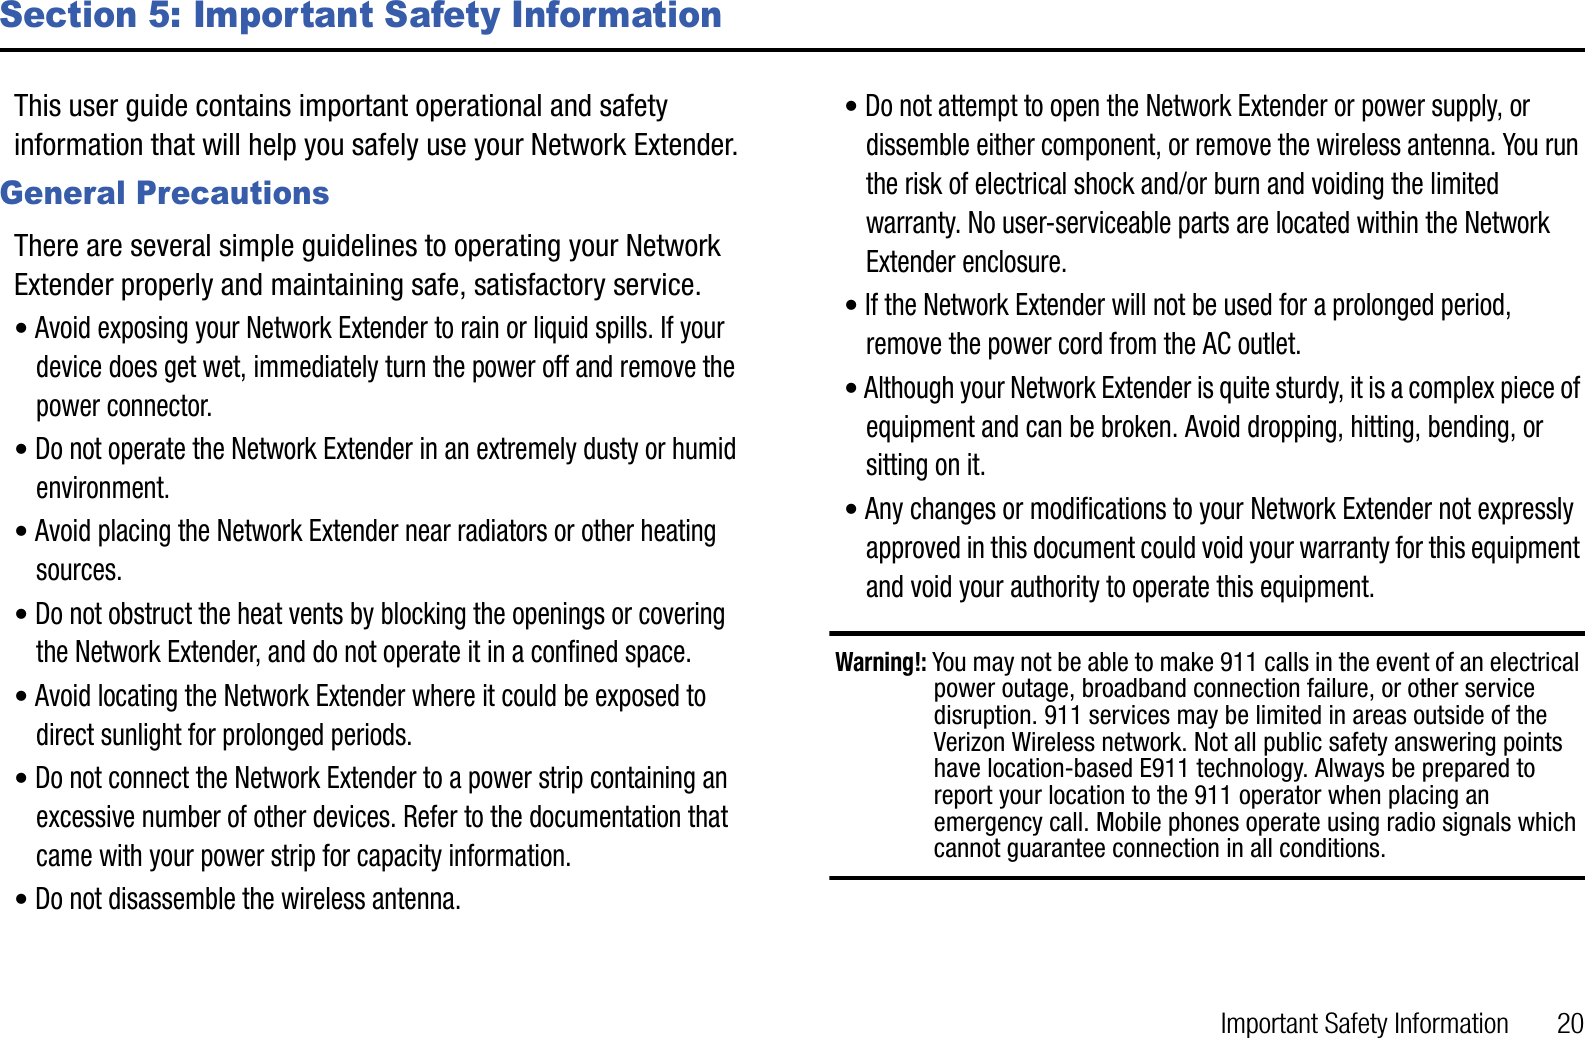 Important Safety Information       20Section 5: Important Safety InformationThis user guide contains important operational and safety information that will help you safely use your Network Extender. General PrecautionsThere are several simple guidelines to operating your Network Extender properly and maintaining safe, satisfactory service.•Avoid exposing your Network Extender to rain or liquid spills. If your device does get wet, immediately turn the power off and remove the power connector. •Do not operate the Network Extender in an extremely dusty or humid environment. •Avoid placing the Network Extender near radiators or other heating sources.•Do not obstruct the heat vents by blocking the openings or covering the Network Extender, and do not operate it in a confined space.•Avoid locating the Network Extender where it could be exposed to direct sunlight for prolonged periods.•Do not connect the Network Extender to a power strip containing an excessive number of other devices. Refer to the documentation that came with your power strip for capacity information.•Do not disassemble the wireless antenna.•Do not attempt to open the Network Extender or power supply, or dissemble either component, or remove the wireless antenna. You run the risk of electrical shock and/or burn and voiding the limited warranty. No user-serviceable parts are located within the Network Extender enclosure.•If the Network Extender will not be used for a prolonged period, remove the power cord from the AC outlet.•Although your Network Extender is quite sturdy, it is a complex piece of equipment and can be broken. Avoid dropping, hitting, bending, or sitting on it.•Any changes or modifications to your Network Extender not expressly approved in this document could void your warranty for this equipment and void your authority to operate this equipment.Warning!: You may not be able to make 911 calls in the event of an electrical power outage, broadband connection failure, or other service disruption. 911 services may be limited in areas outside of the Verizon Wireless network. Not all public safety answering points have location-based E911 technology. Always be prepared to report your location to the 911 operator when placing an emergency call. Mobile phones operate using radio signals which cannot guarantee connection in all conditions.